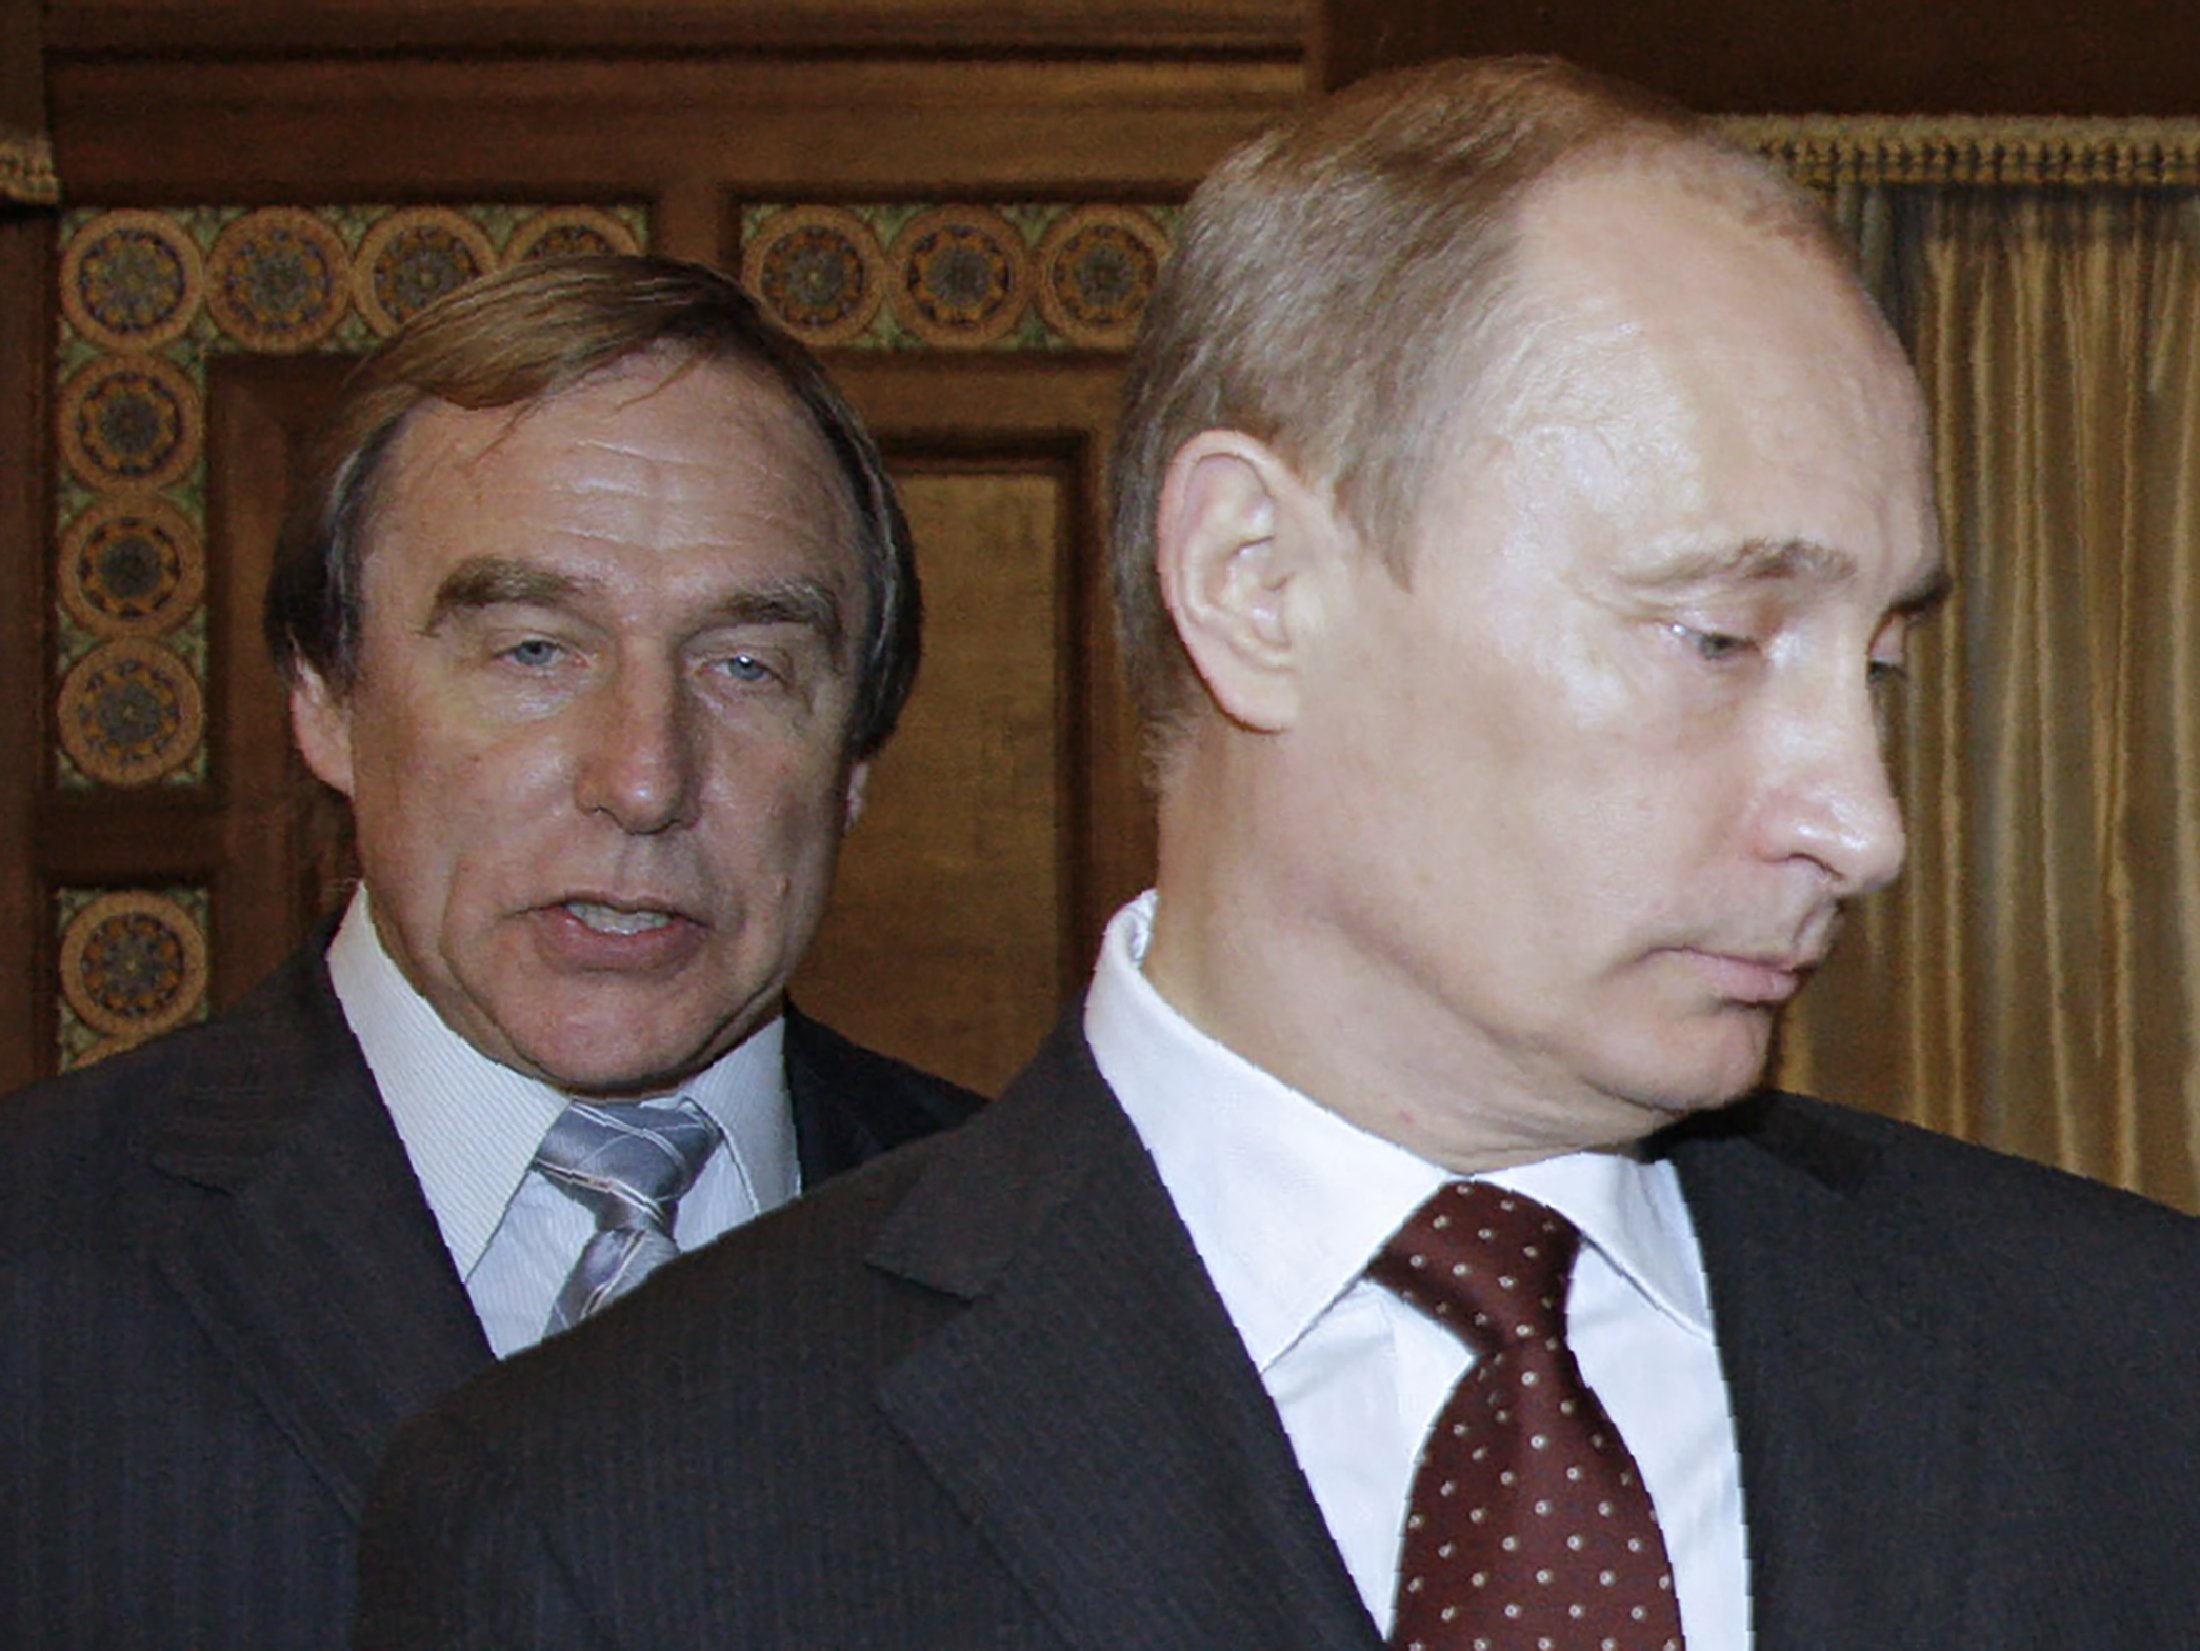 A picture of Vladimir Putin and Russian cellist Sergei Roldugin, artistic director of the St. Petersburg House of Music, visiting the house, formerly a palace owned by Grand Duke Alexei Romanov, in St. Petersburg on Nov. 21, 2009.